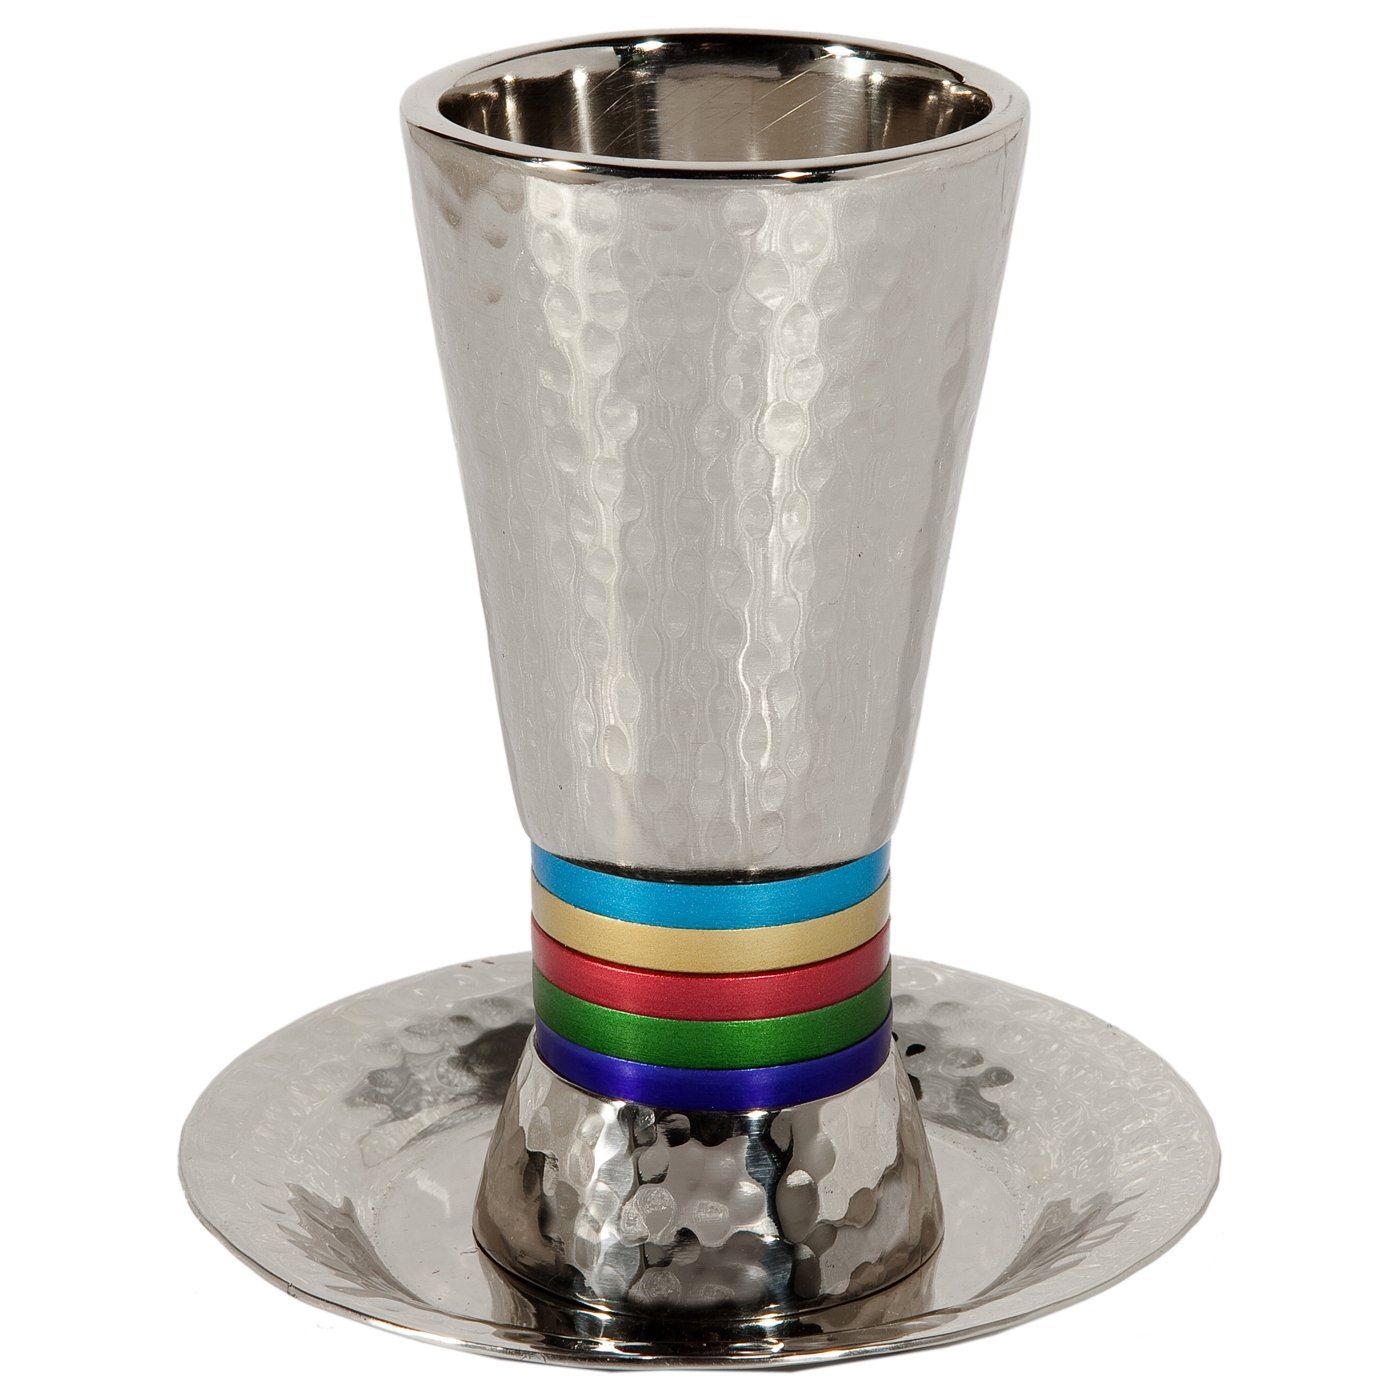 Yair Emanuel Textured Nickel 5-Bands Kiddush Cup with Plate  - 1